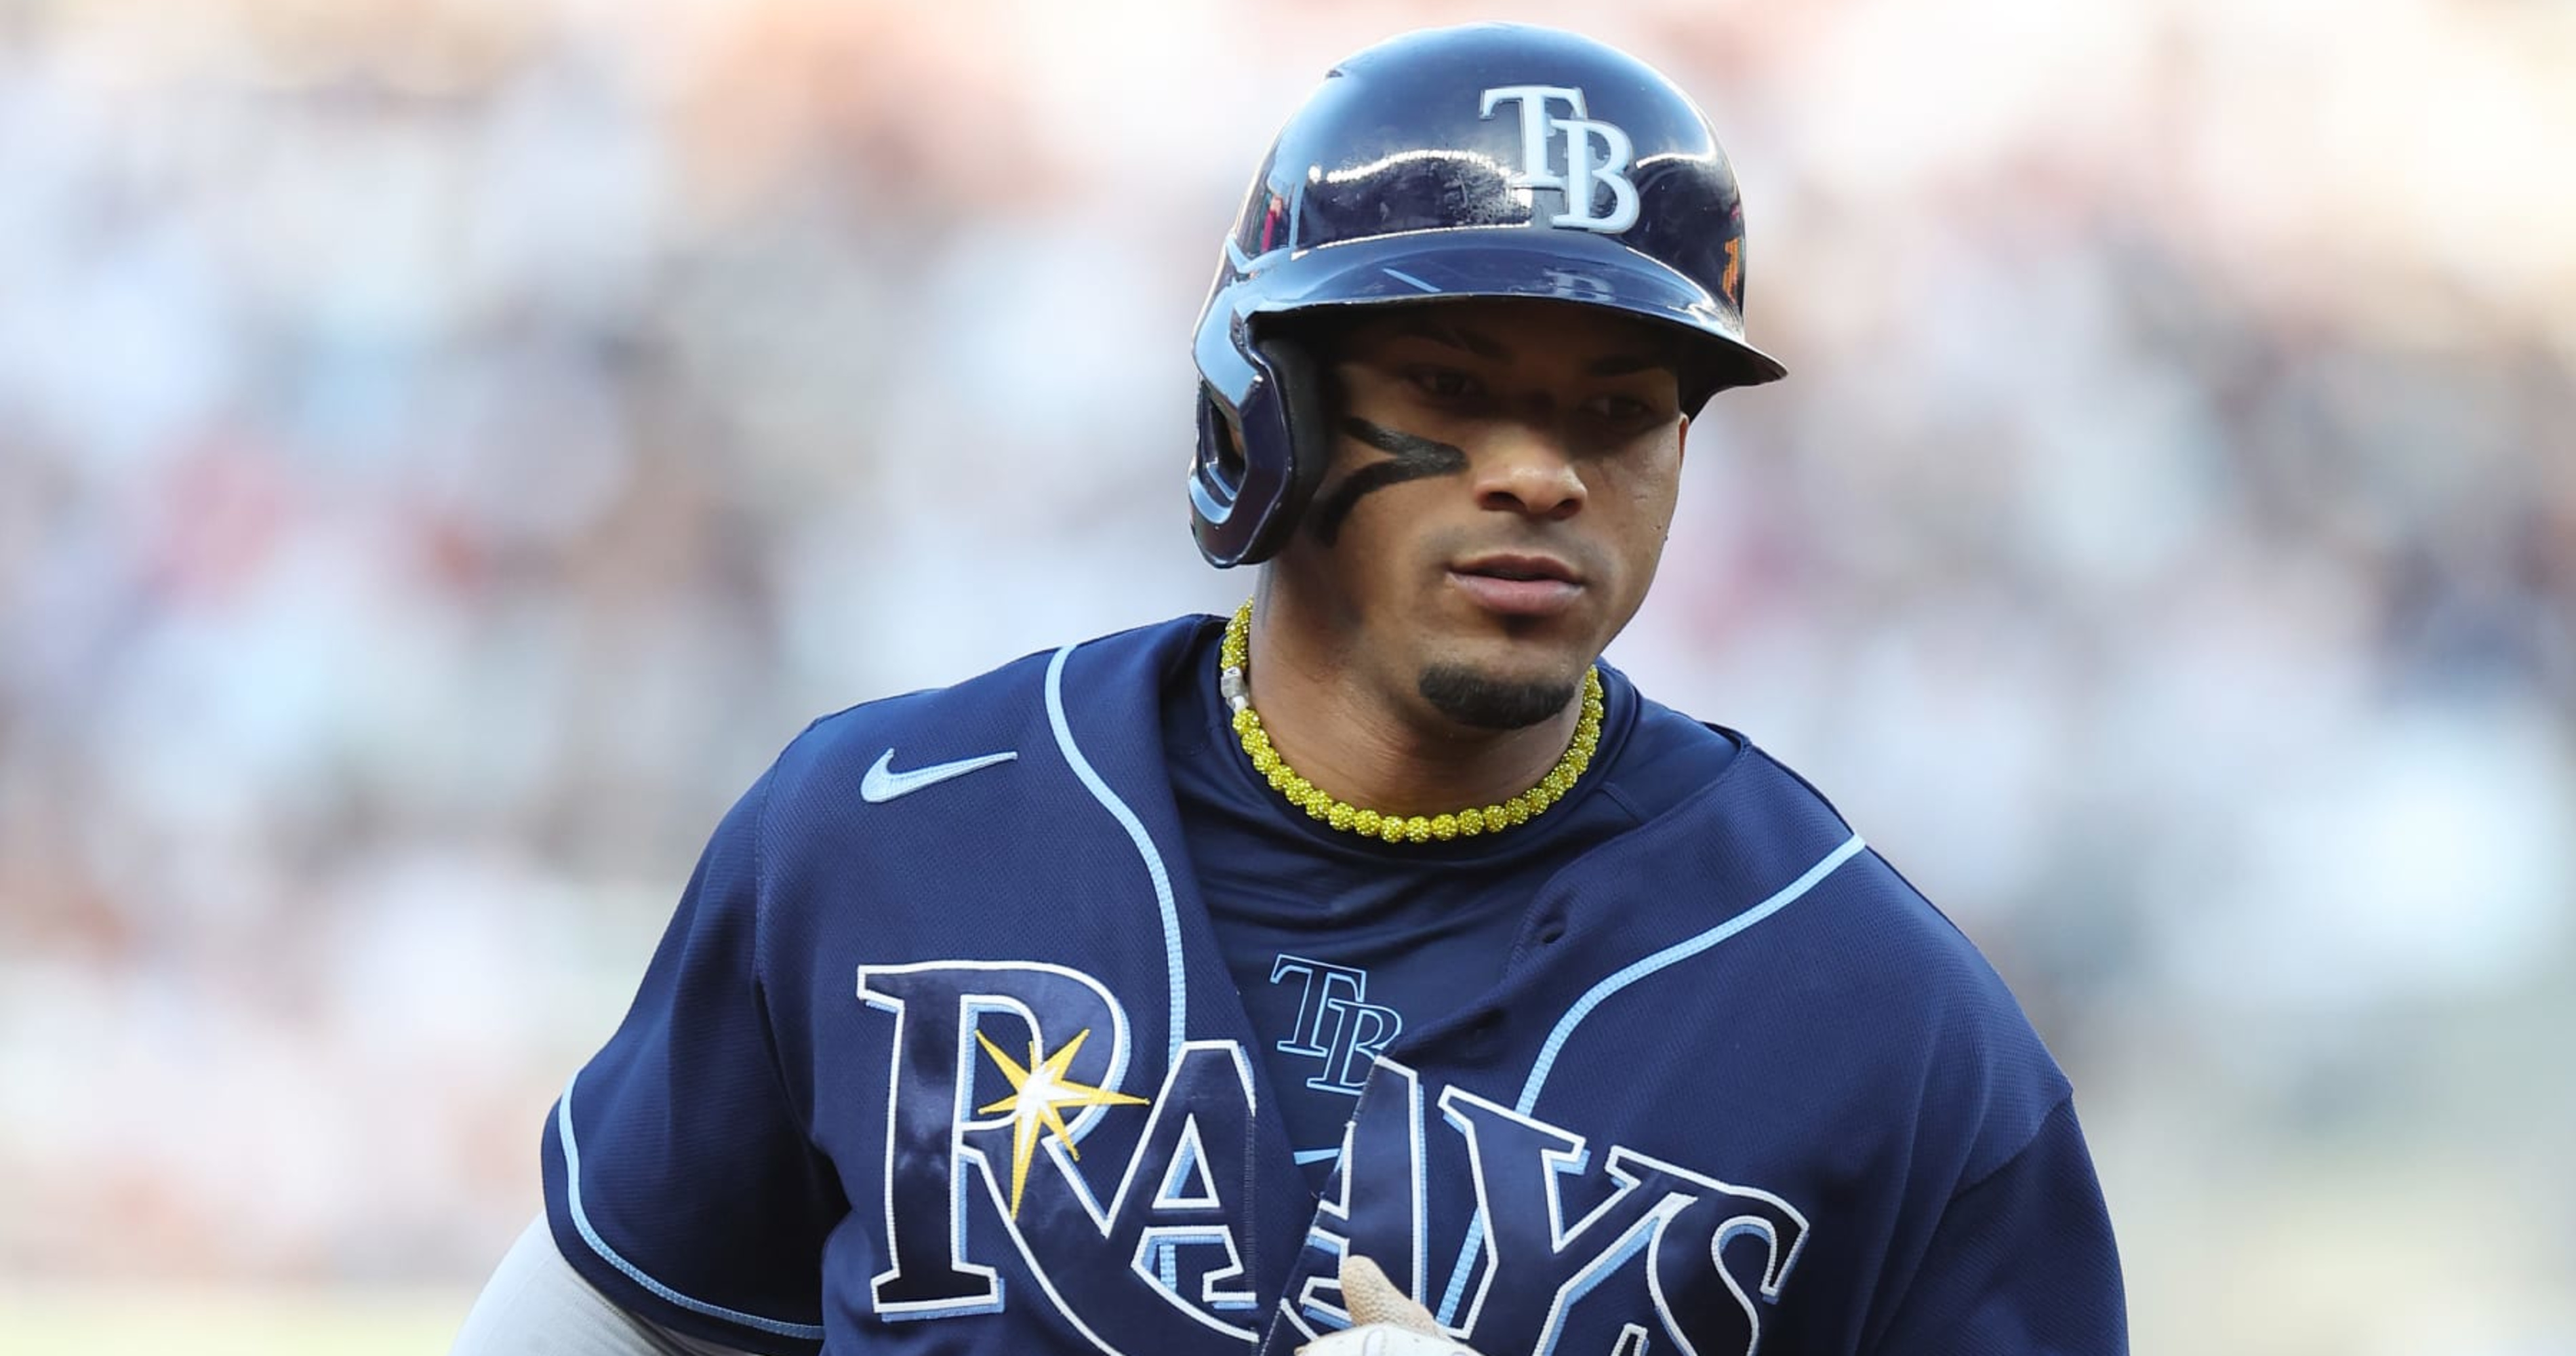 Rays' Wander Franco Subject of MLB Investigation After Social